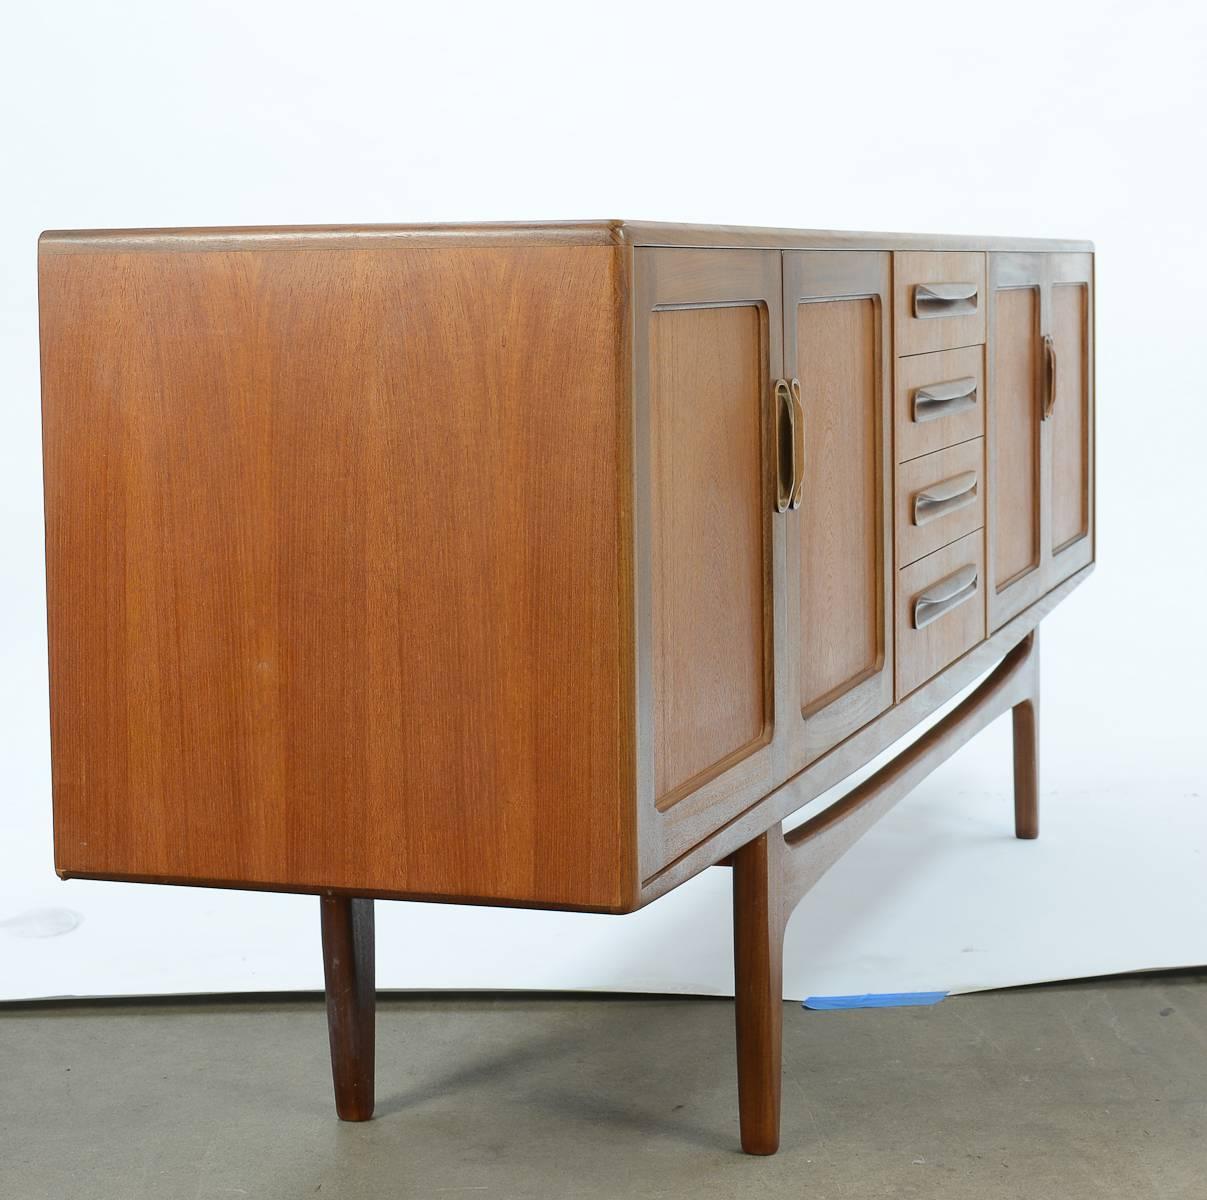 A truly grand teak credenza by Ib Kofod-Larsen for G Plan.

Danish Mid-Century design leader Kofod-Larsen (1921-2003) frequently worked with gorgeous woods, such as teak and rosewood, as well rich leathers. Clean, sculptural lines characterize